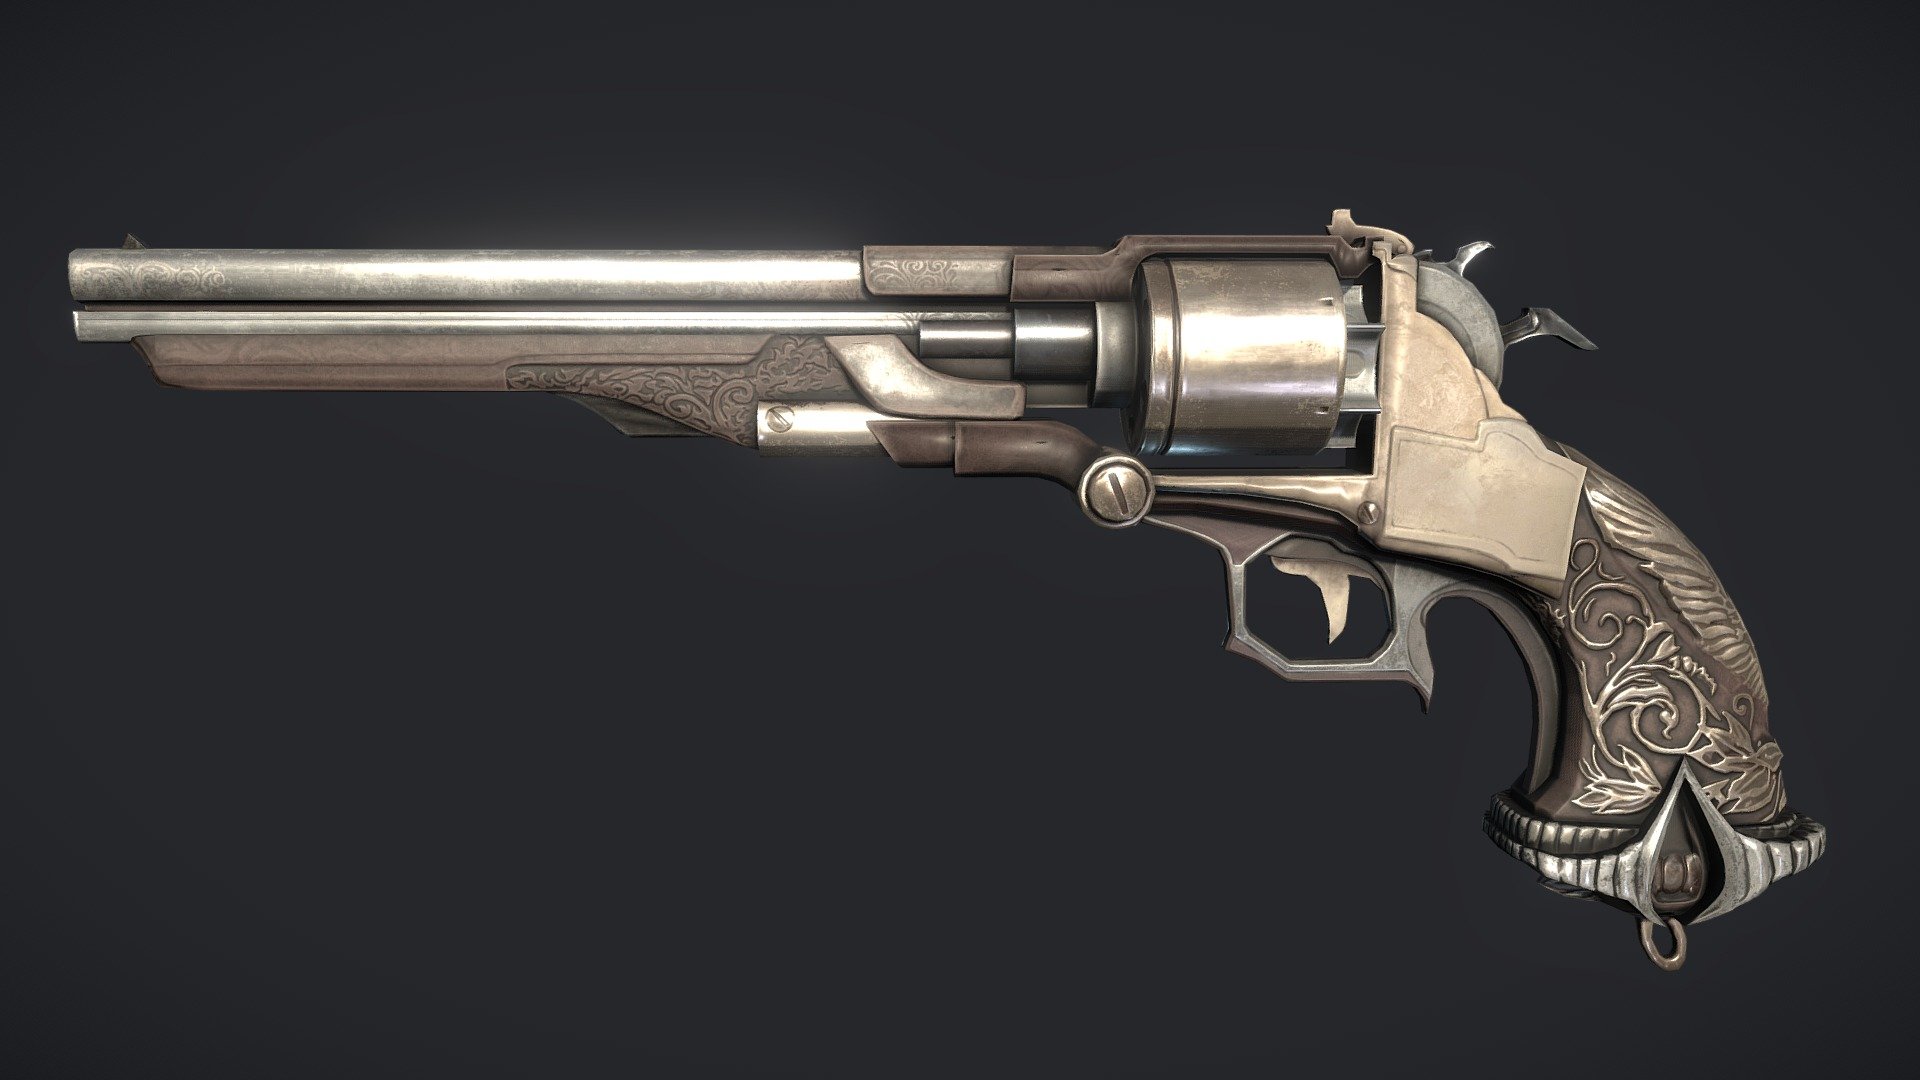 This Revolver was created to fit within a hypothetical game based in the Assassins Creed universe which takes place in Victorian London. The model has 3 levels of detail, with limitations of 5,000 polys, 2,500 polys and 800 polys. The texture maps for this model were limited to 2048 x 2048 px.

Thanks for checking out my work :)

Find the original concept on Happy Mutt's Deviant Art:
https://www.deviantart.com/happy-mutt/art/Assassin-s-Creed-V-Reclamation-Weapon-Design-445546586 - Assassins Creed - Reclamation Revolver - 3D model by EllaSkii 3d model